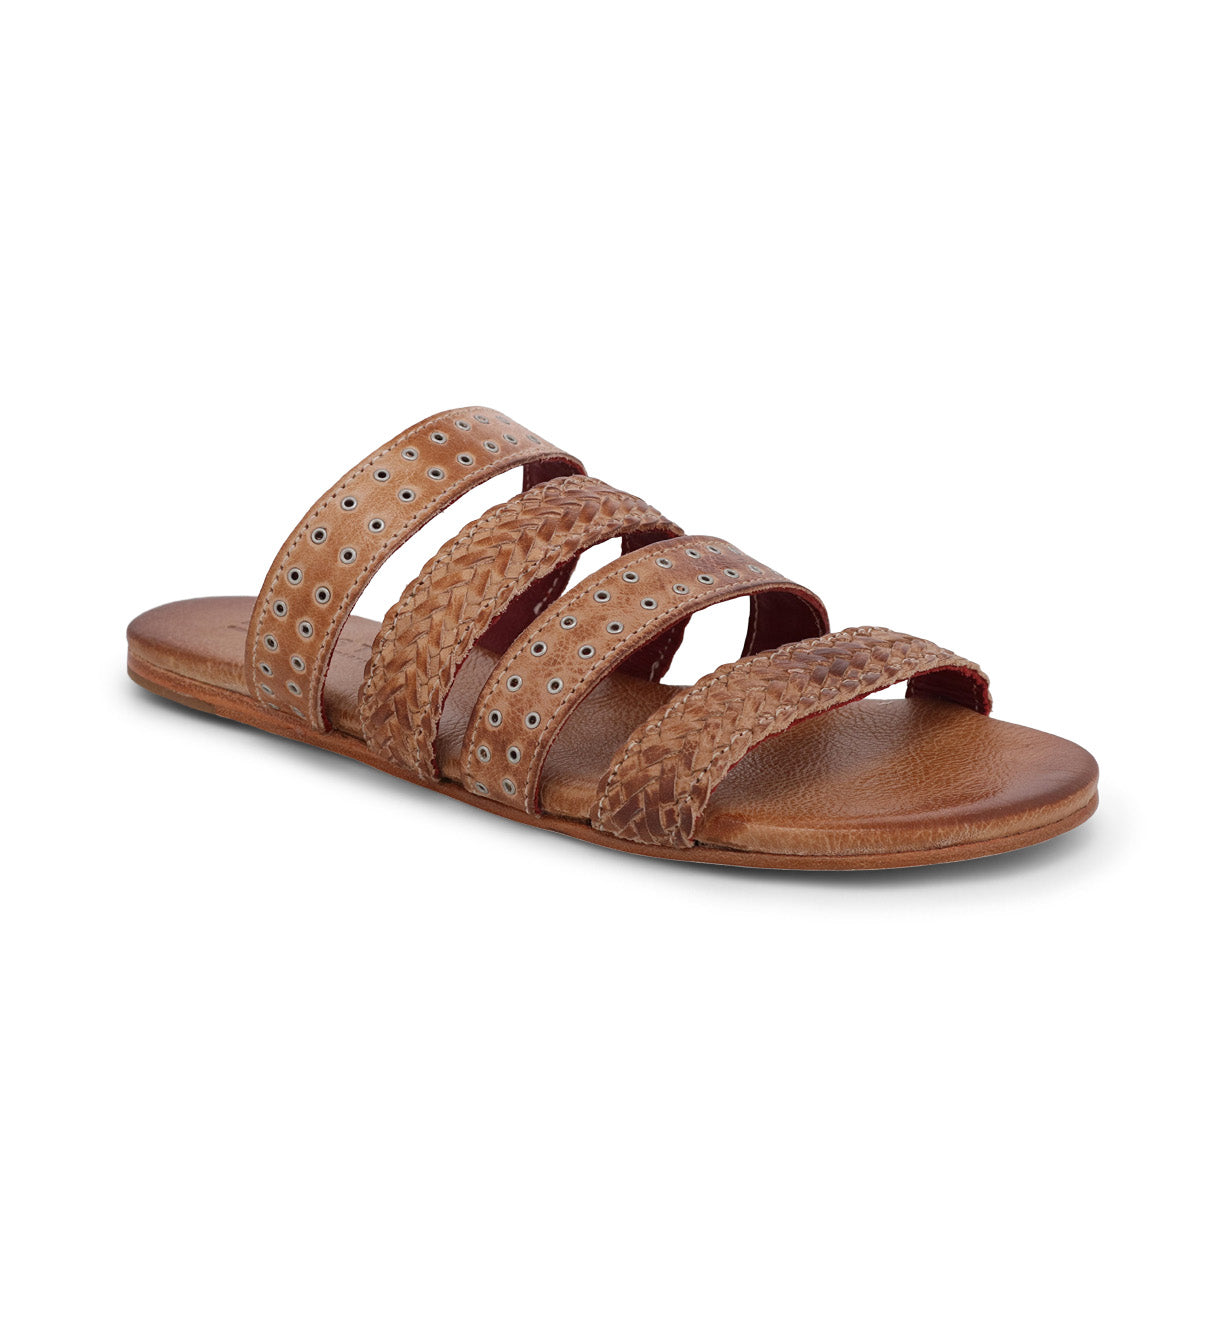 A women's tan sandal with studded straps called Henna by Bed Stu.